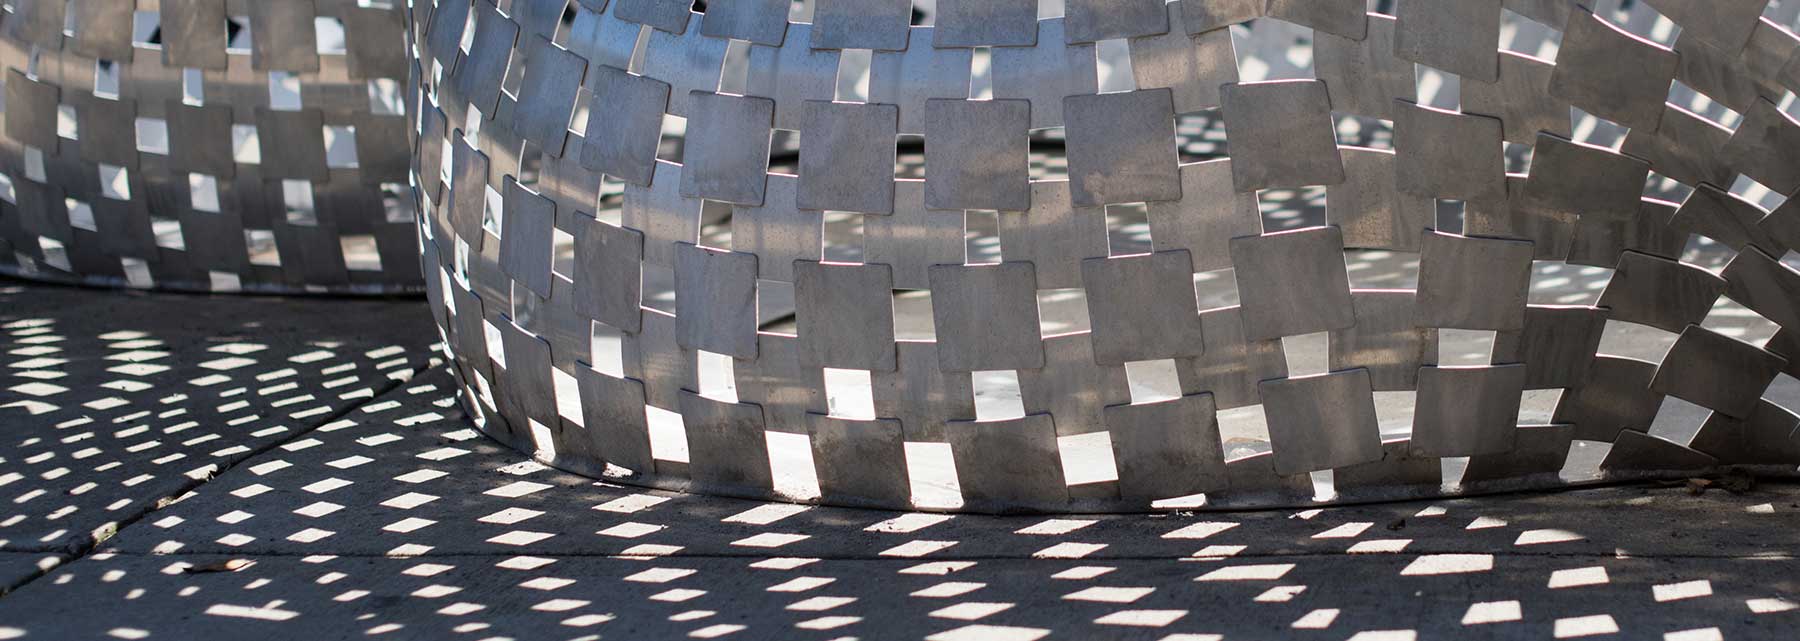 detail of a metal fabric-like sculpture on the UA campus